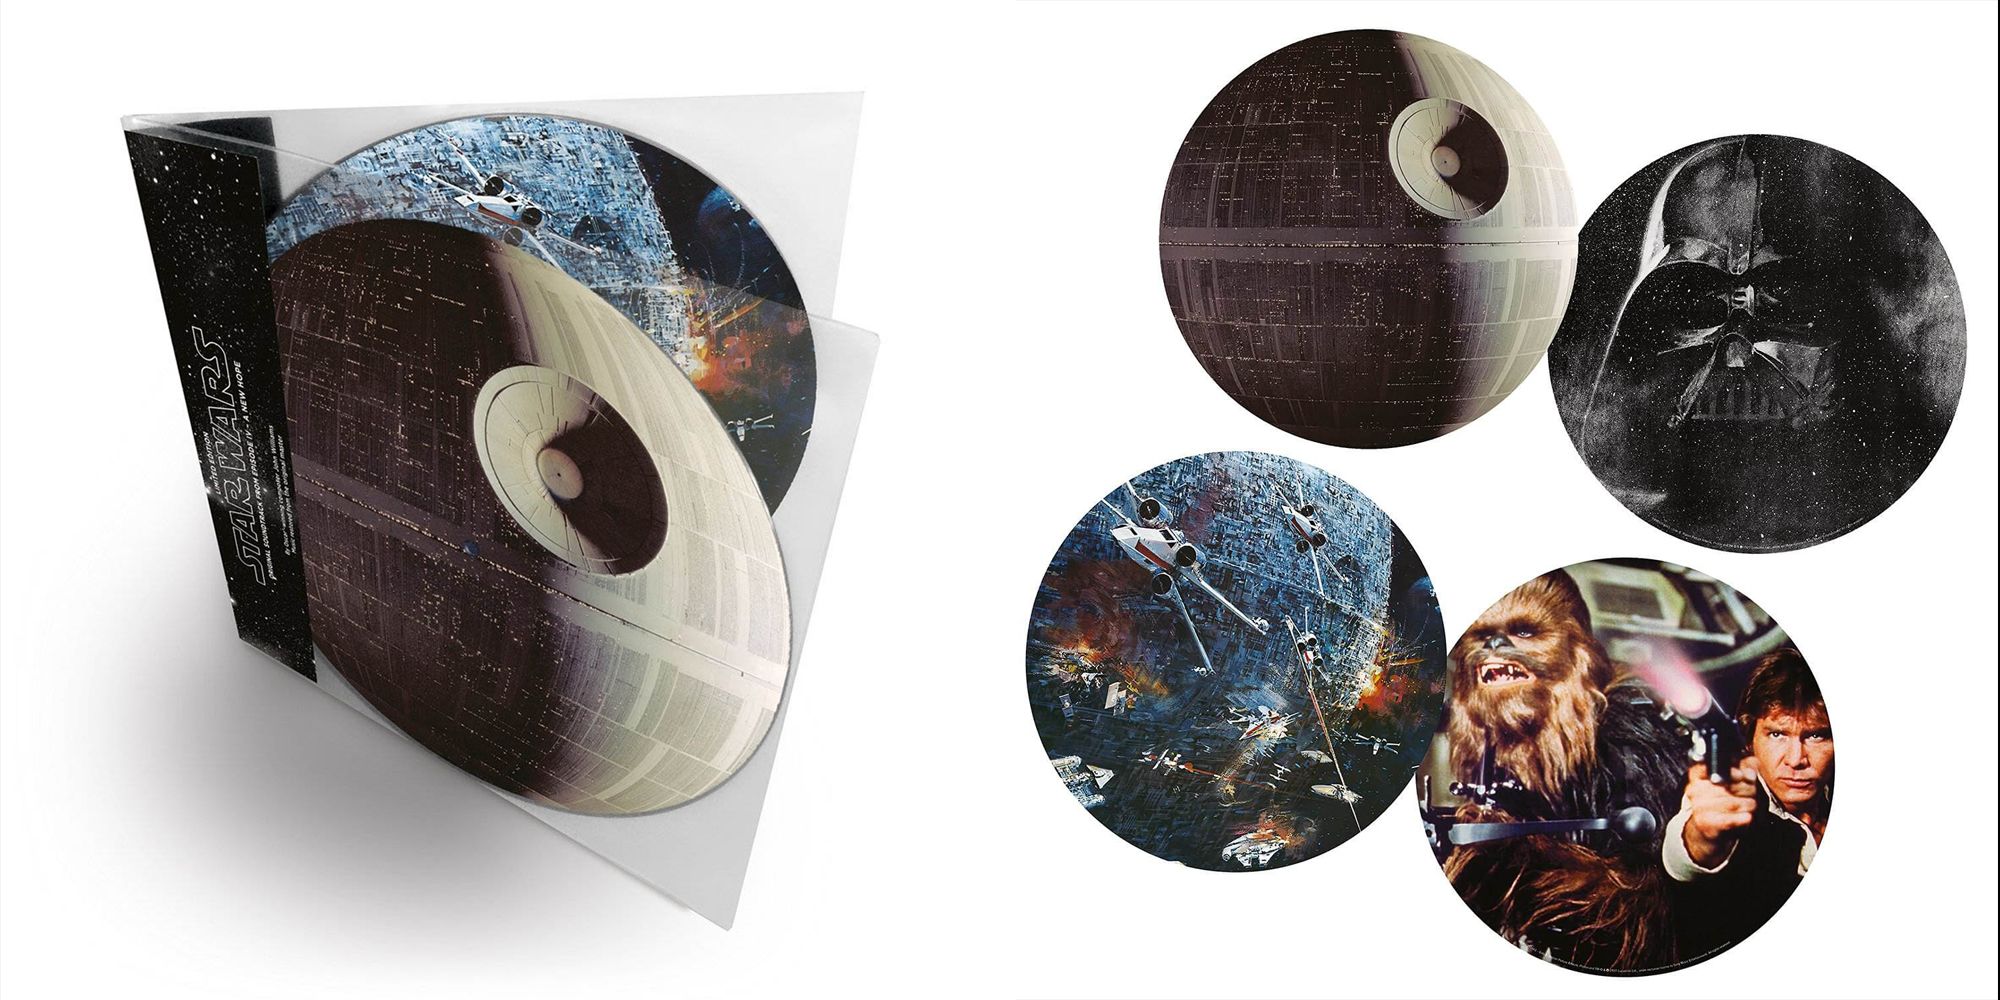 Star Wars Soundtrack to Release on Vinyl That Looks Like the Death Star